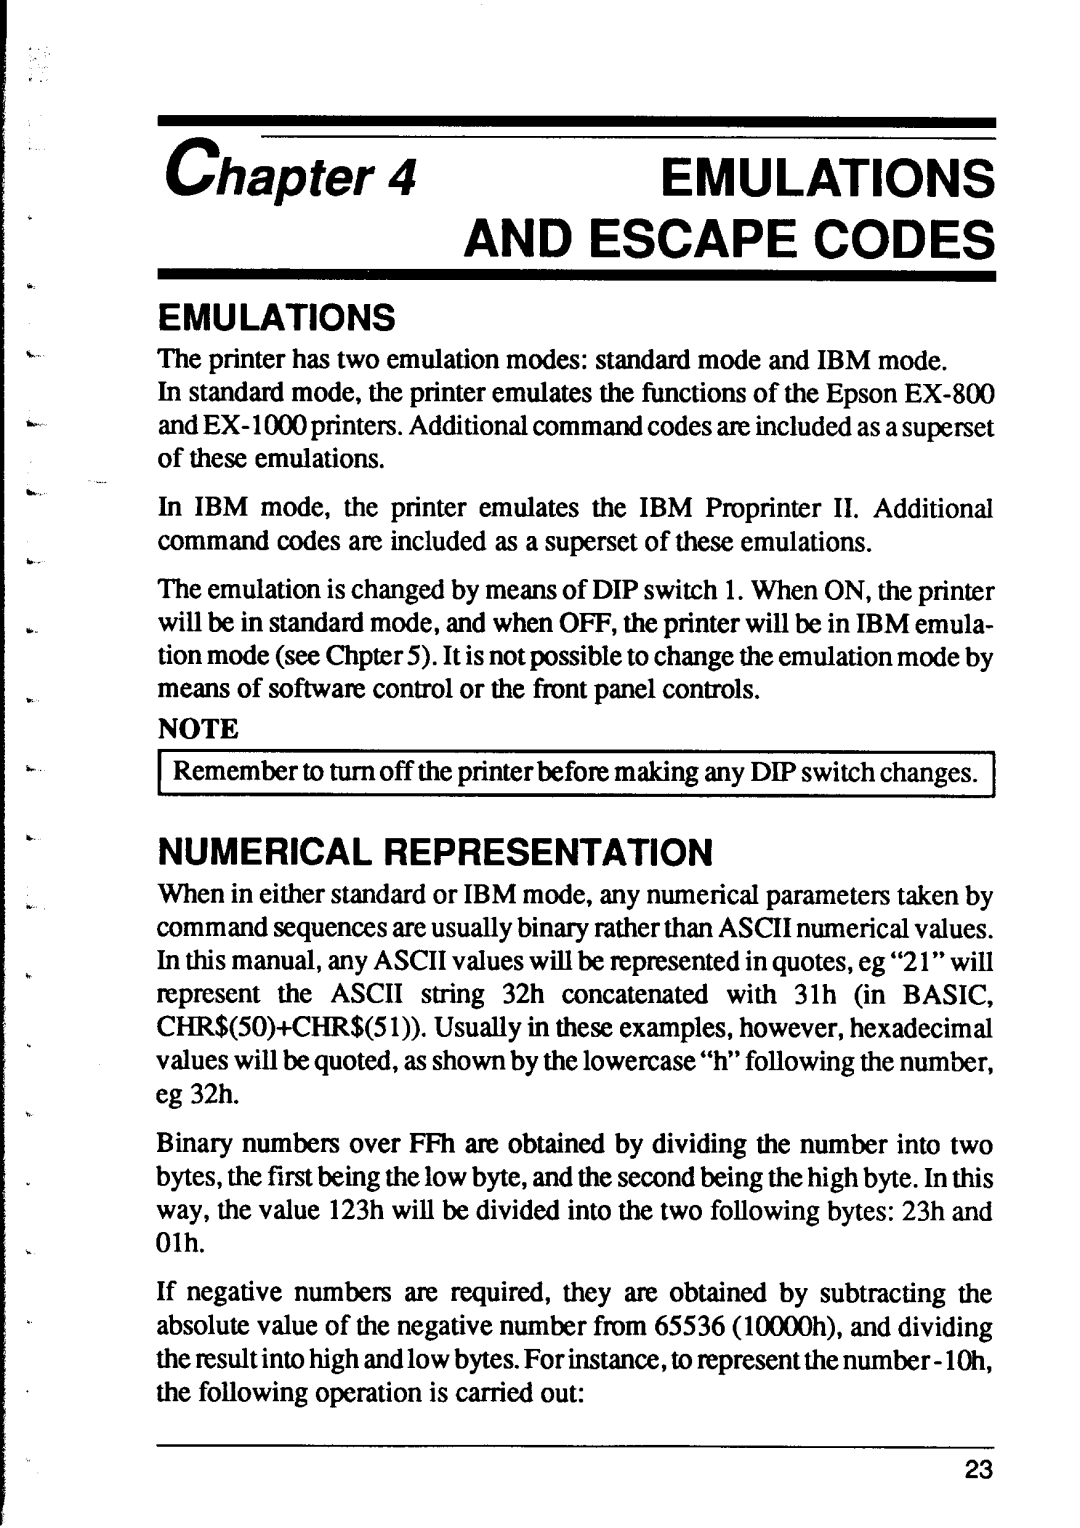 Star Micronics XR-1000, XR-1500 user manual Emulations, And Escape Codes, Numerical Representation, chapter 